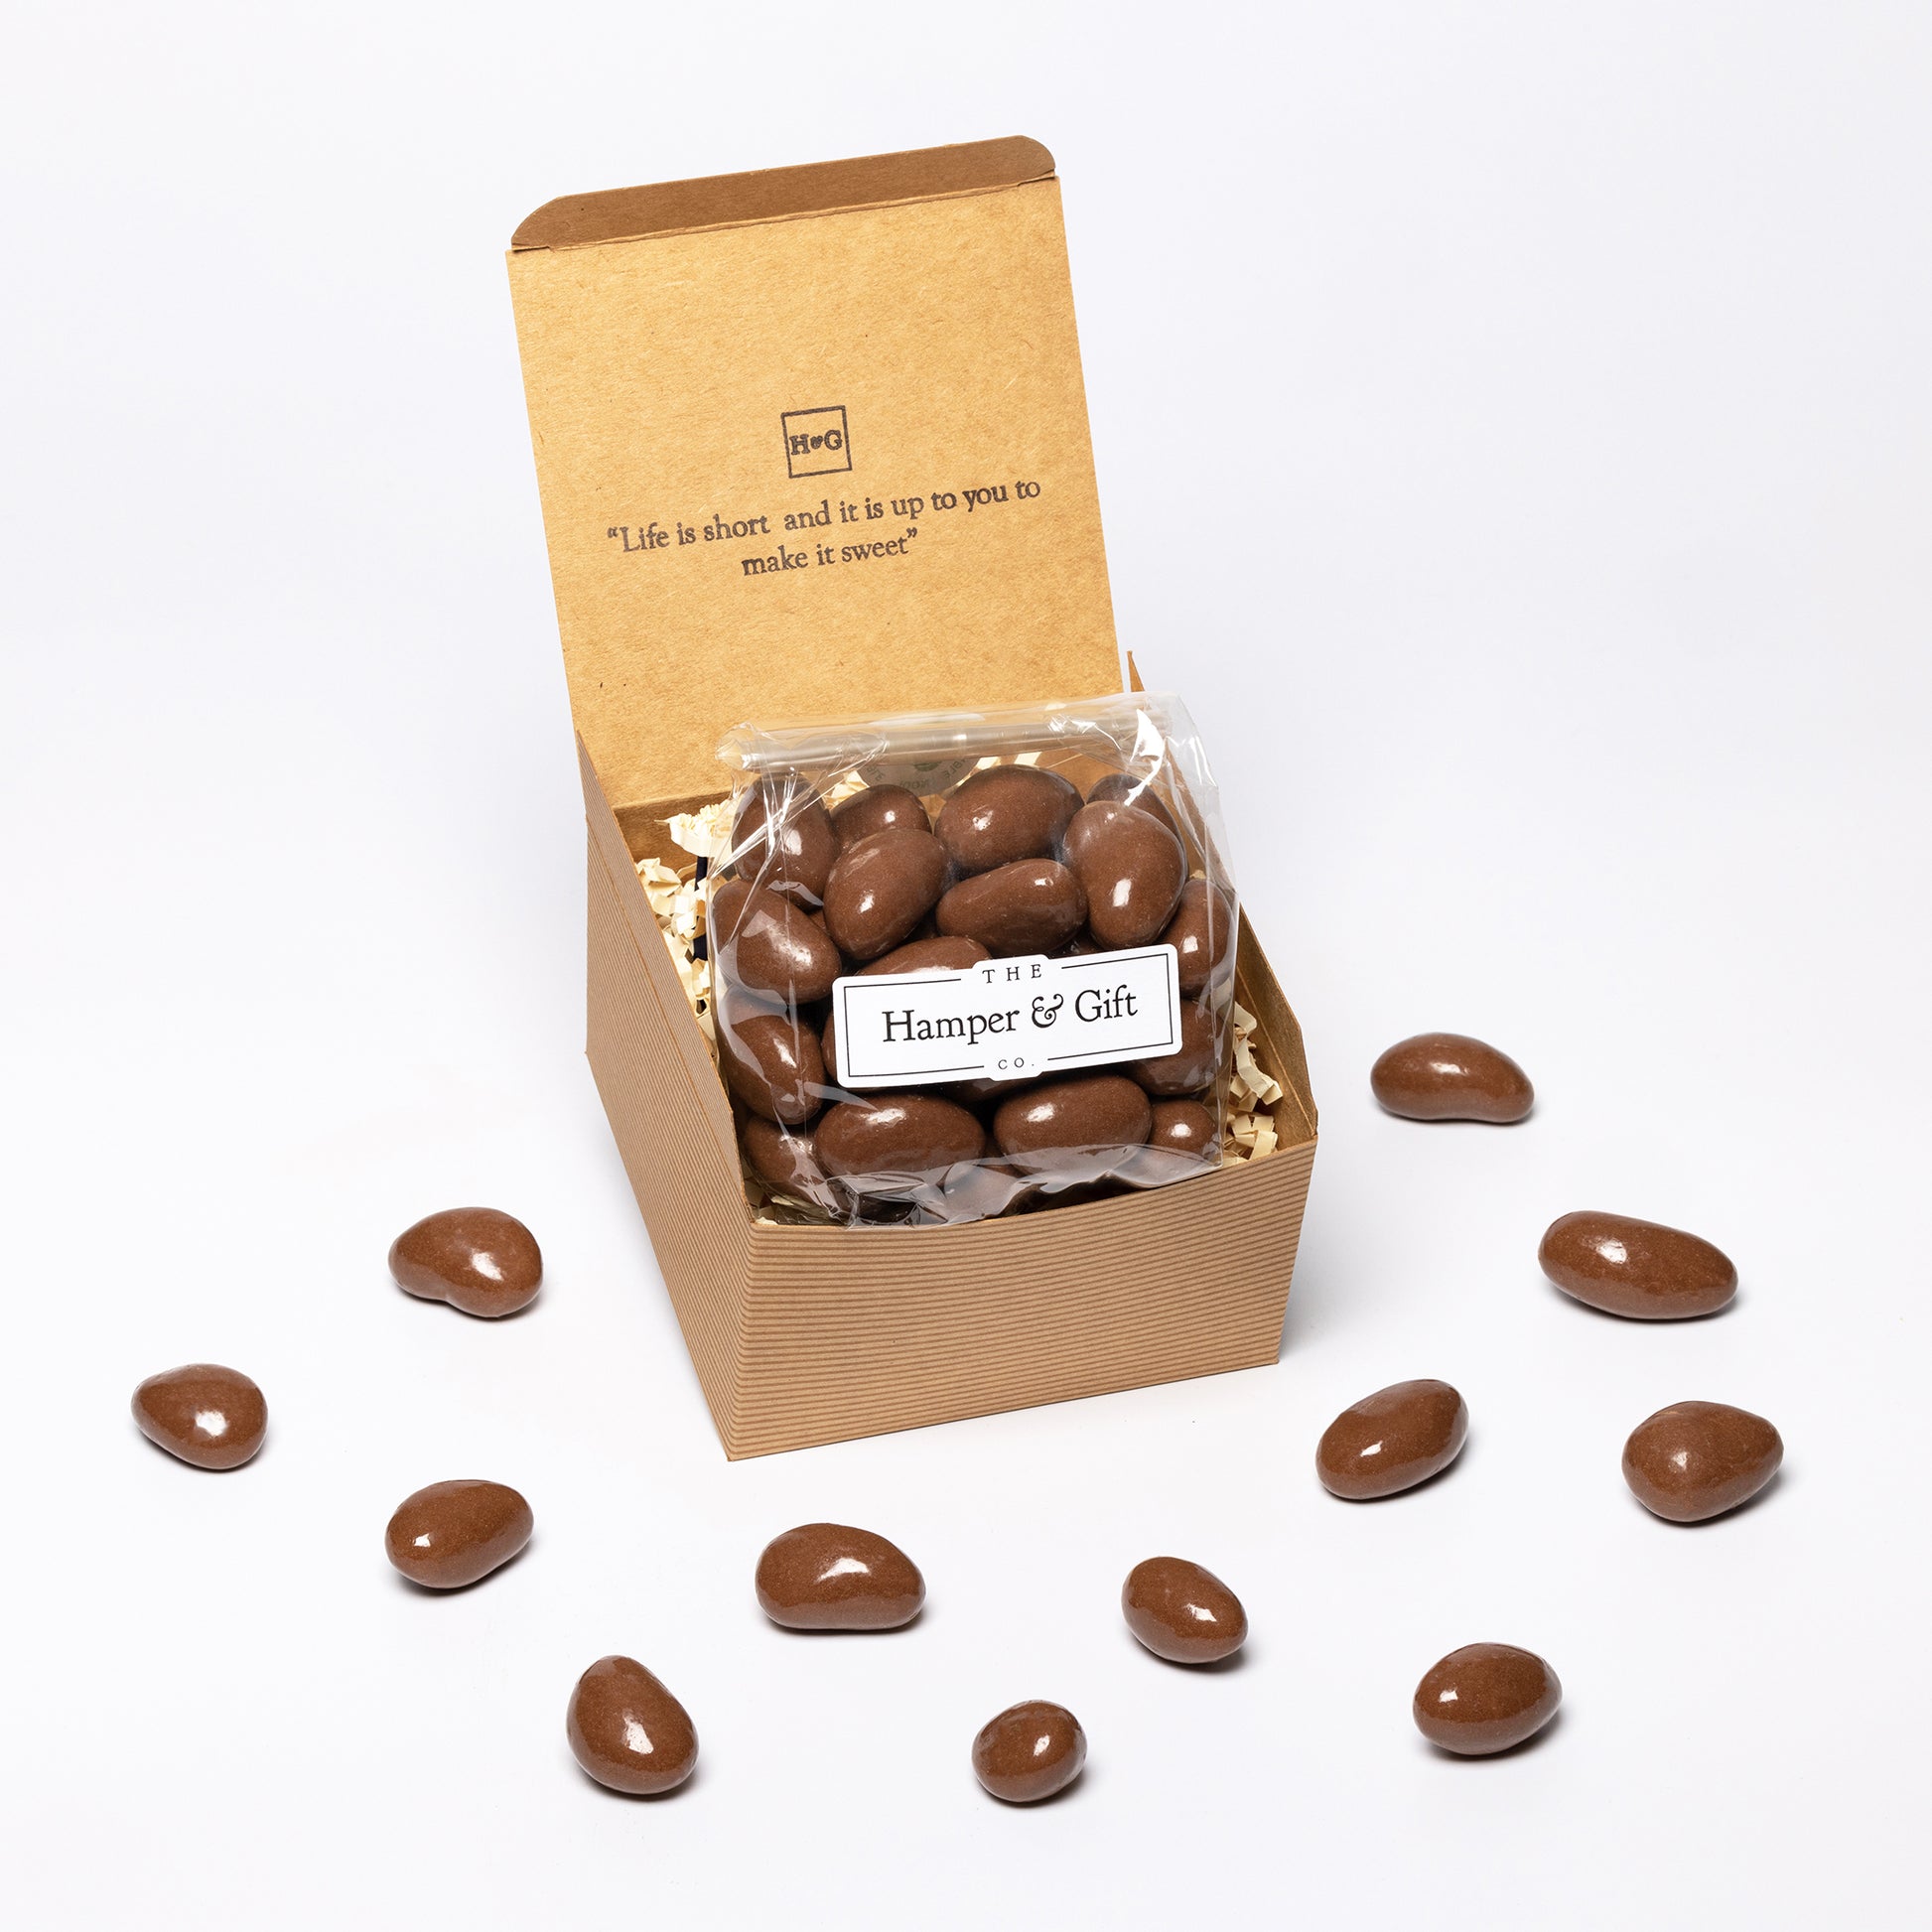 Chocolate covered Brazil Nuts inside a recyled kraft gift box